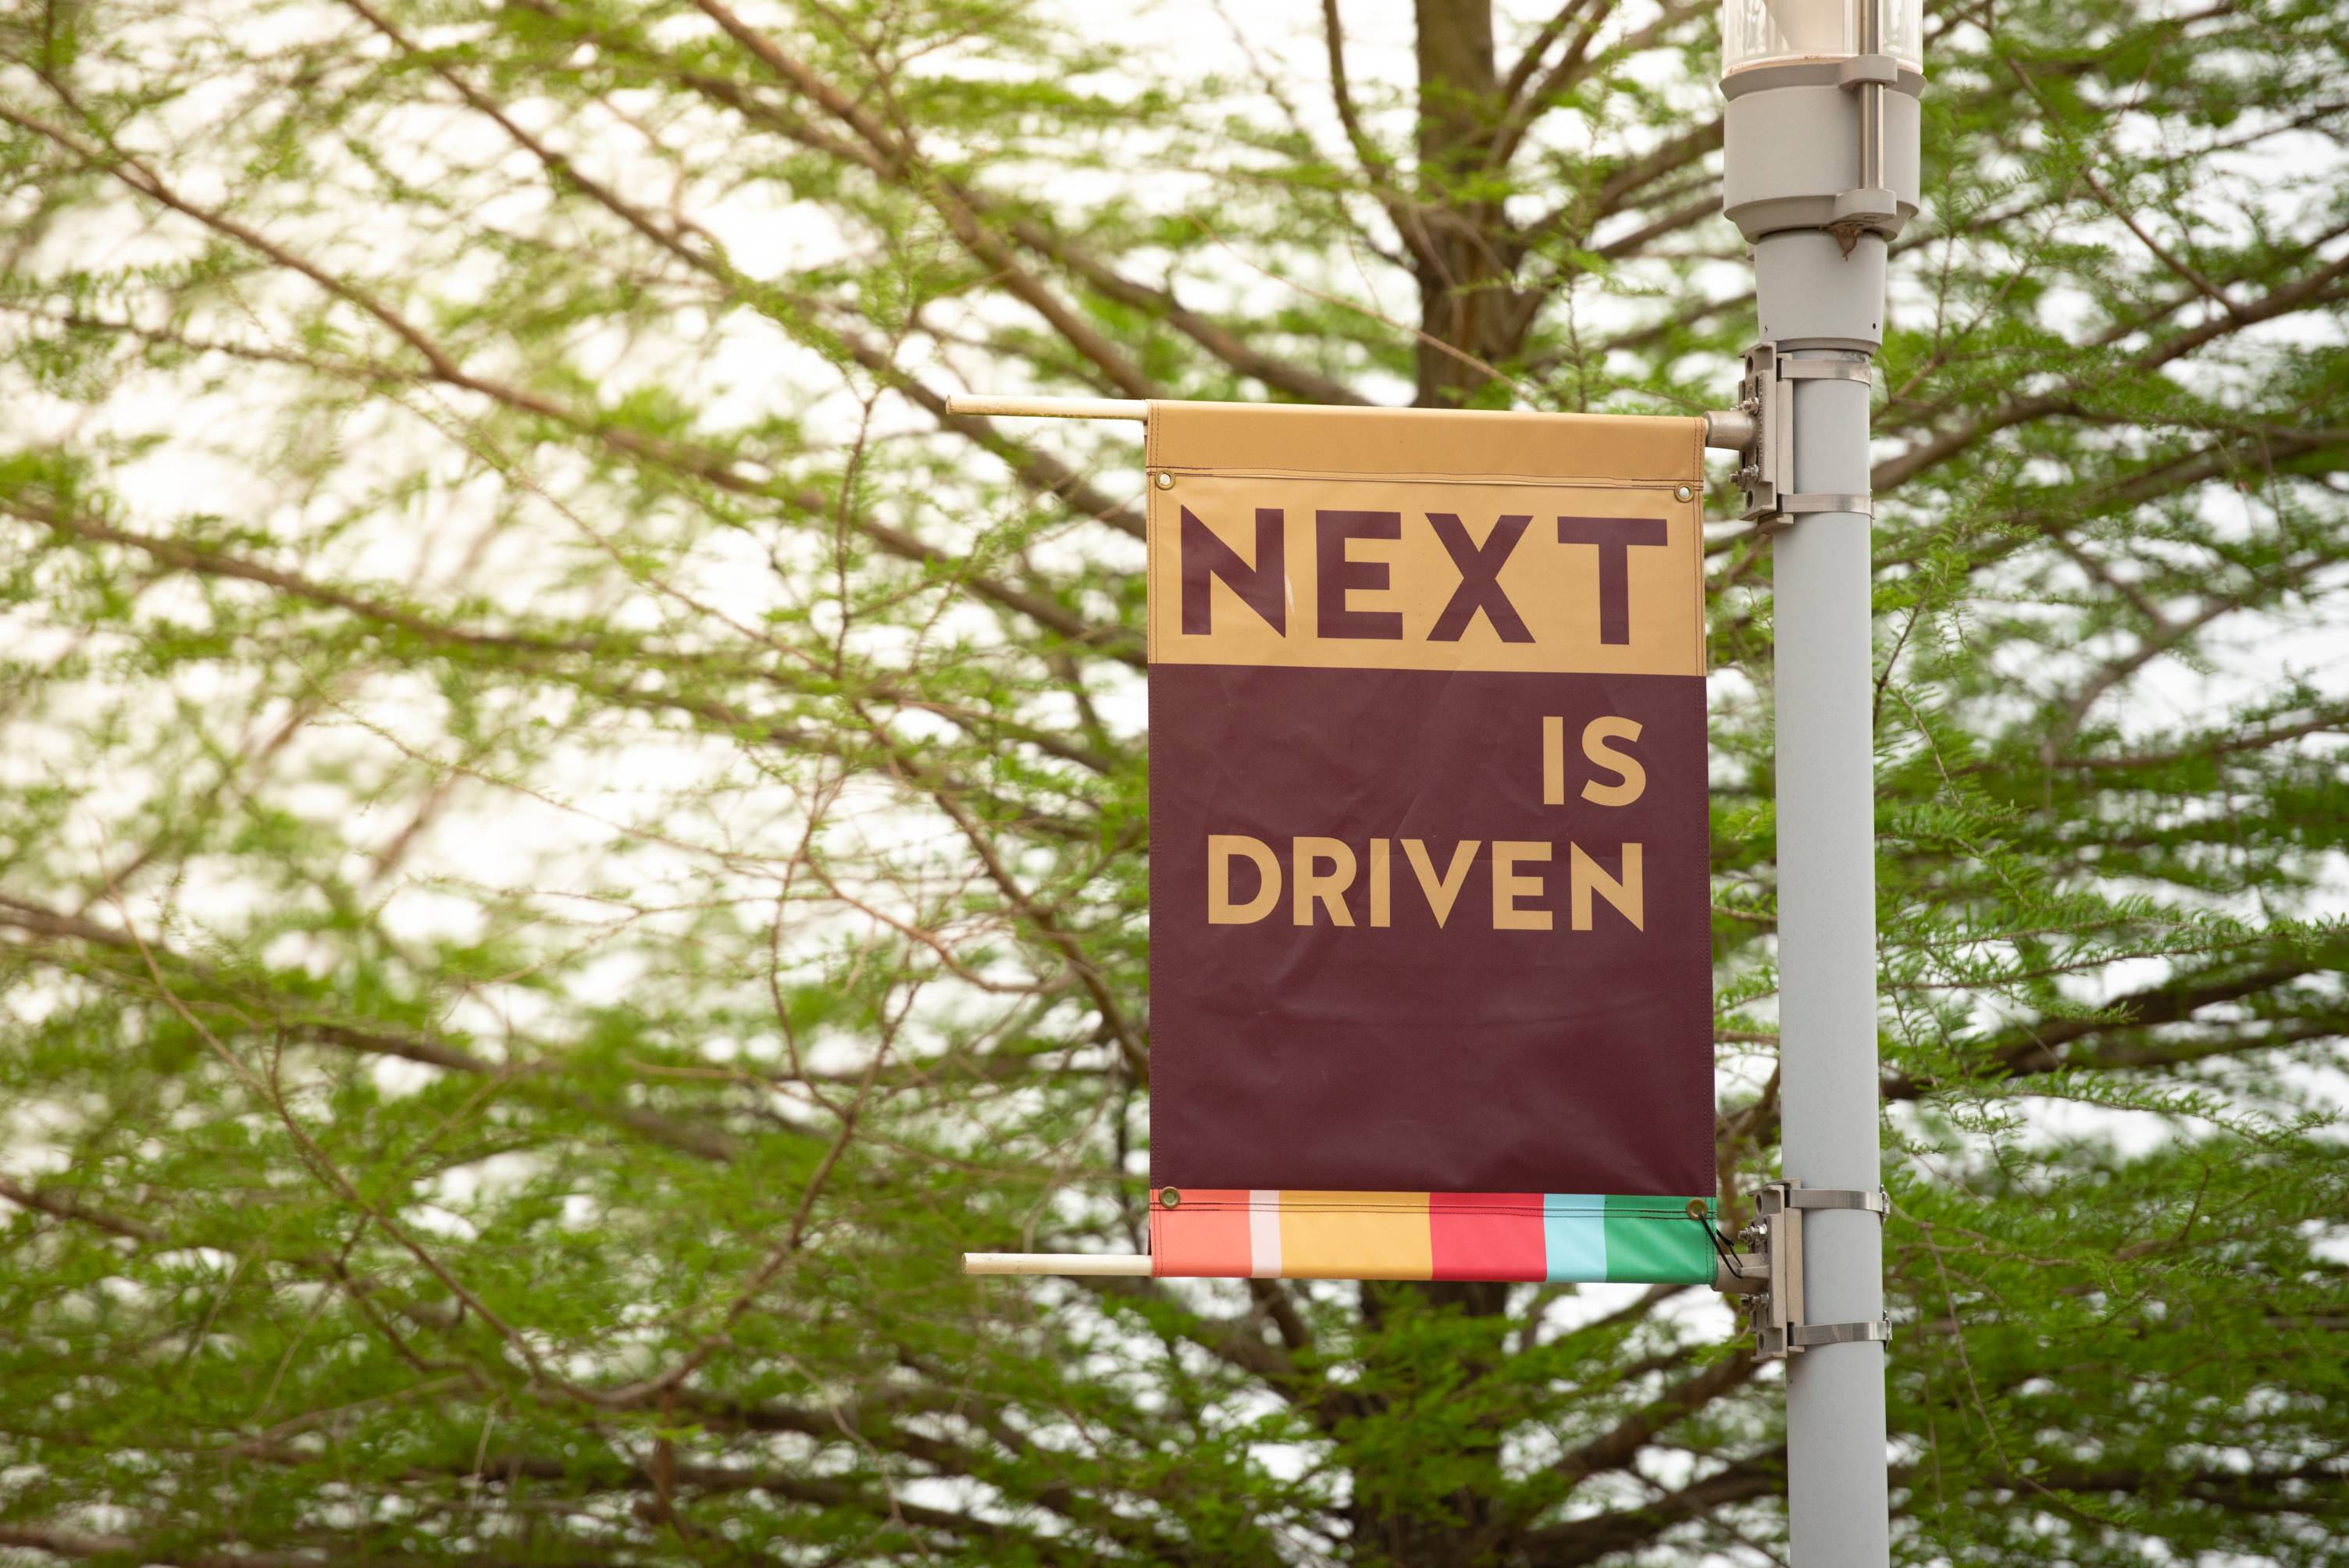 Close up of "Next is driven" light pole banner